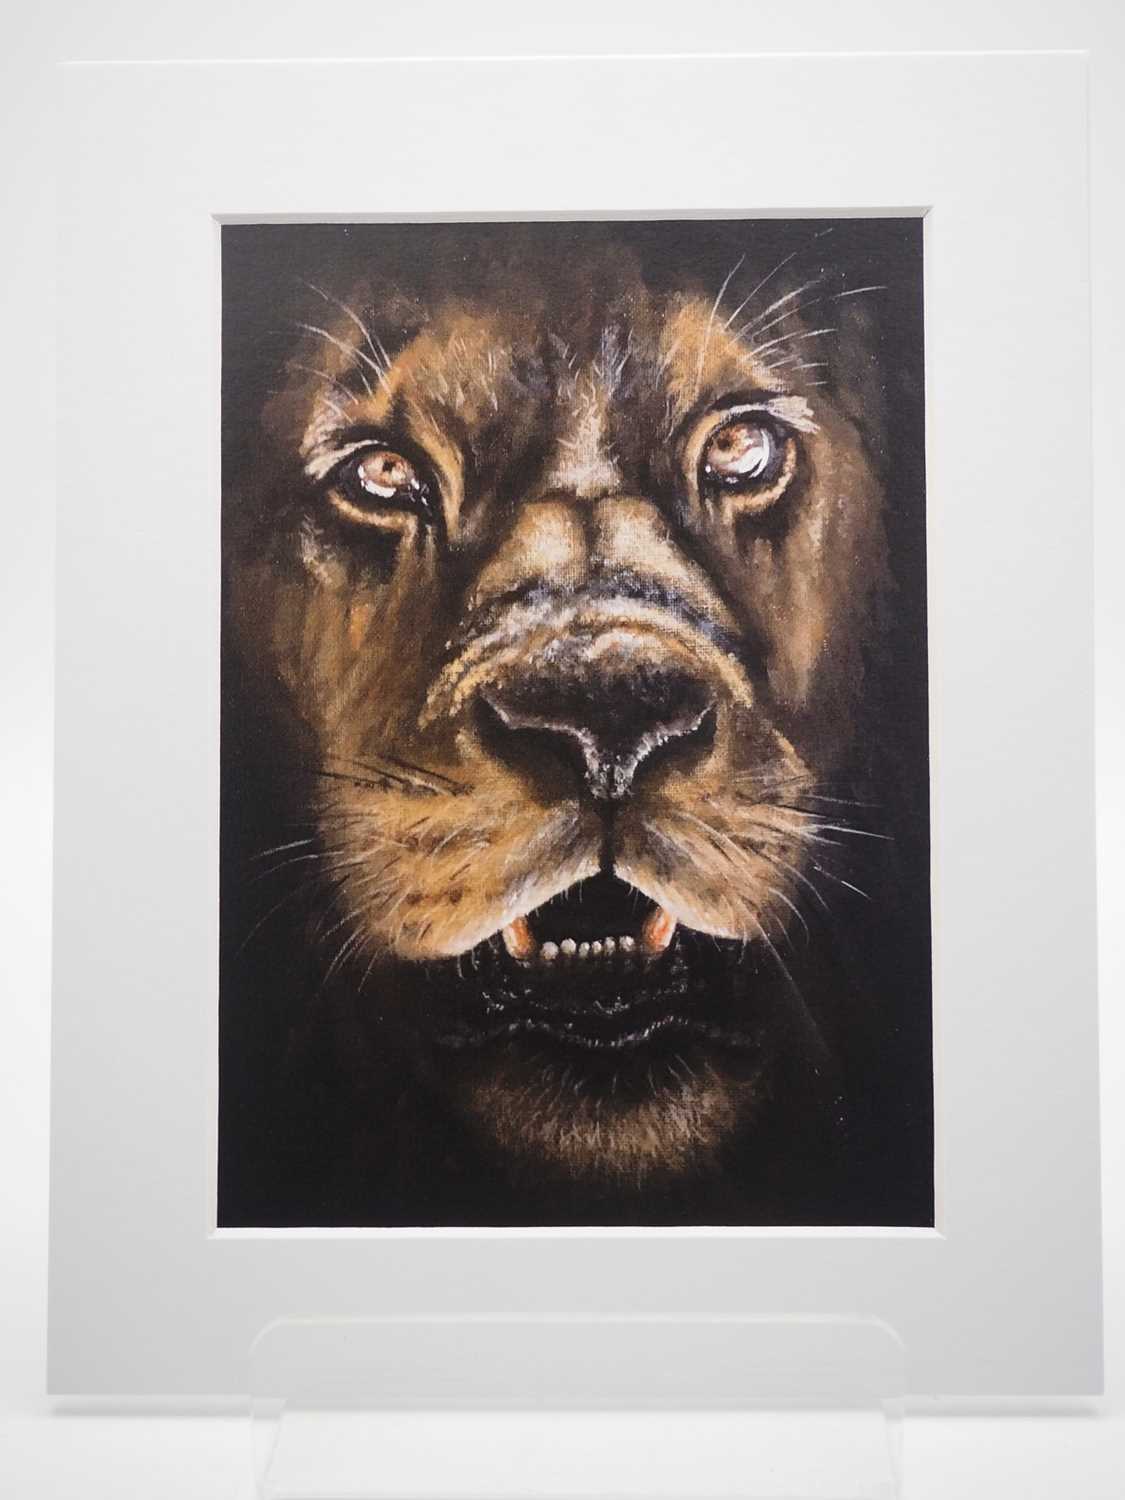 Suzanne Phillips 'LION' - print - 5" x 7" in a 7" x 9" mount PROVENANCE: Donated to and sold on